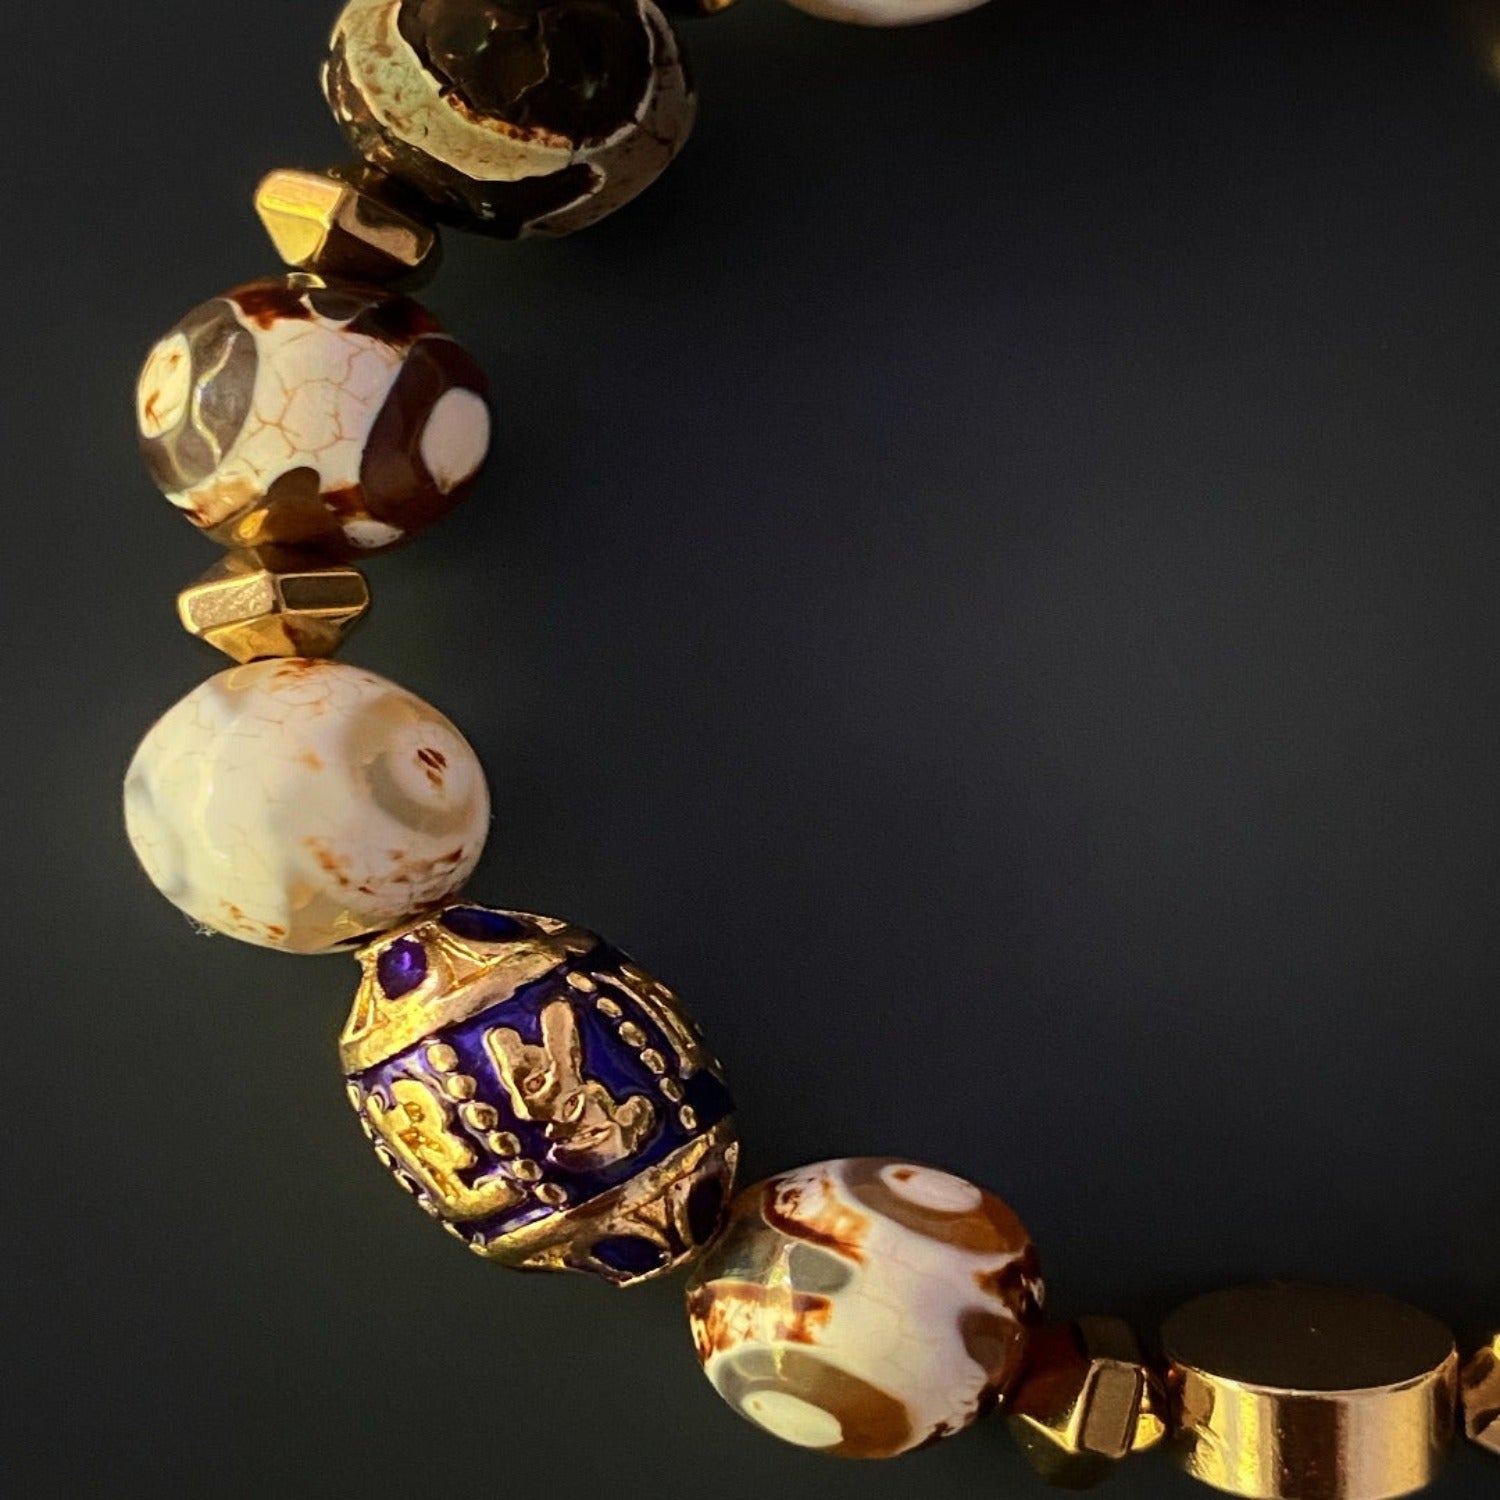 Elevate your style with the Lucky Fish Bracelet Set, beautifully crafted with Tibetan agate beads, gold hematite, and charms representing luck, wisdom, and prosperity.